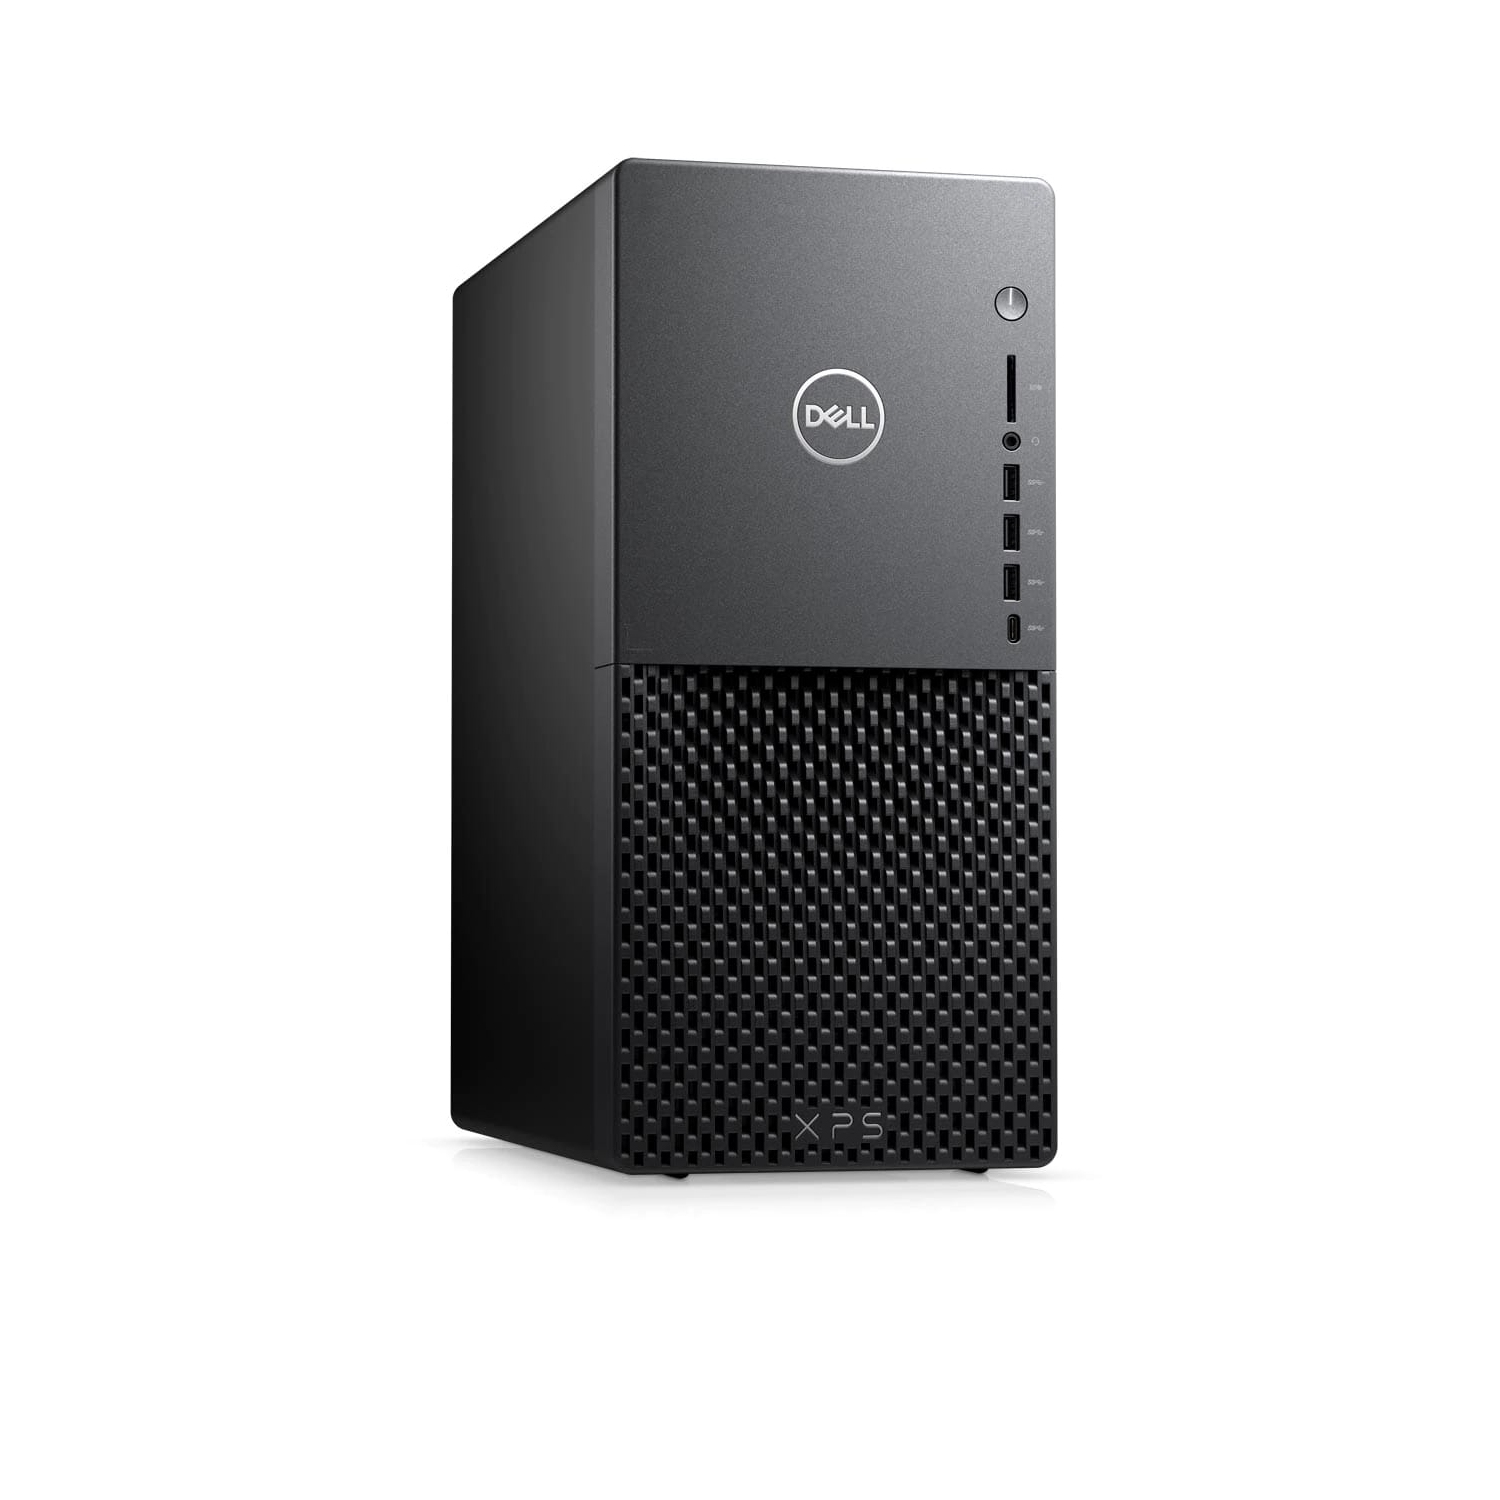 Refurbished (Excellent) - Dell XPS 8940 Desktop (2020) | Core i7 - 1TB HDD + 256GB SSD - 16GB RAM - RTX 2060 | 8 Cores @ 4.8 GHz - 10th Gen CPU Certified Refurbished